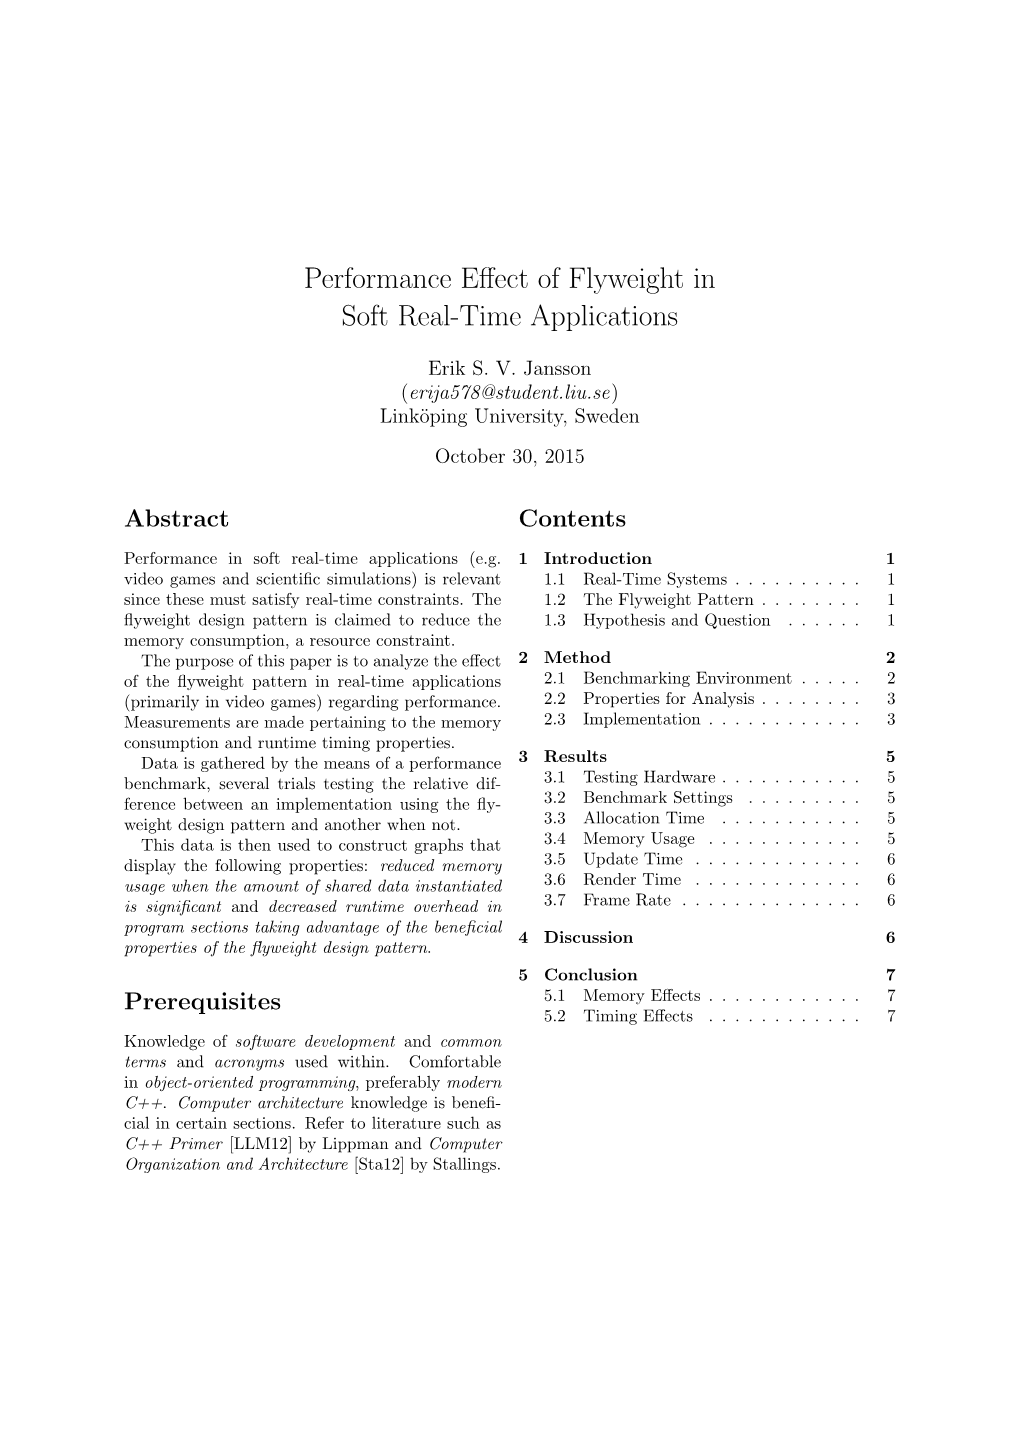 Flyweight Performance Effects in Real-Time Applications